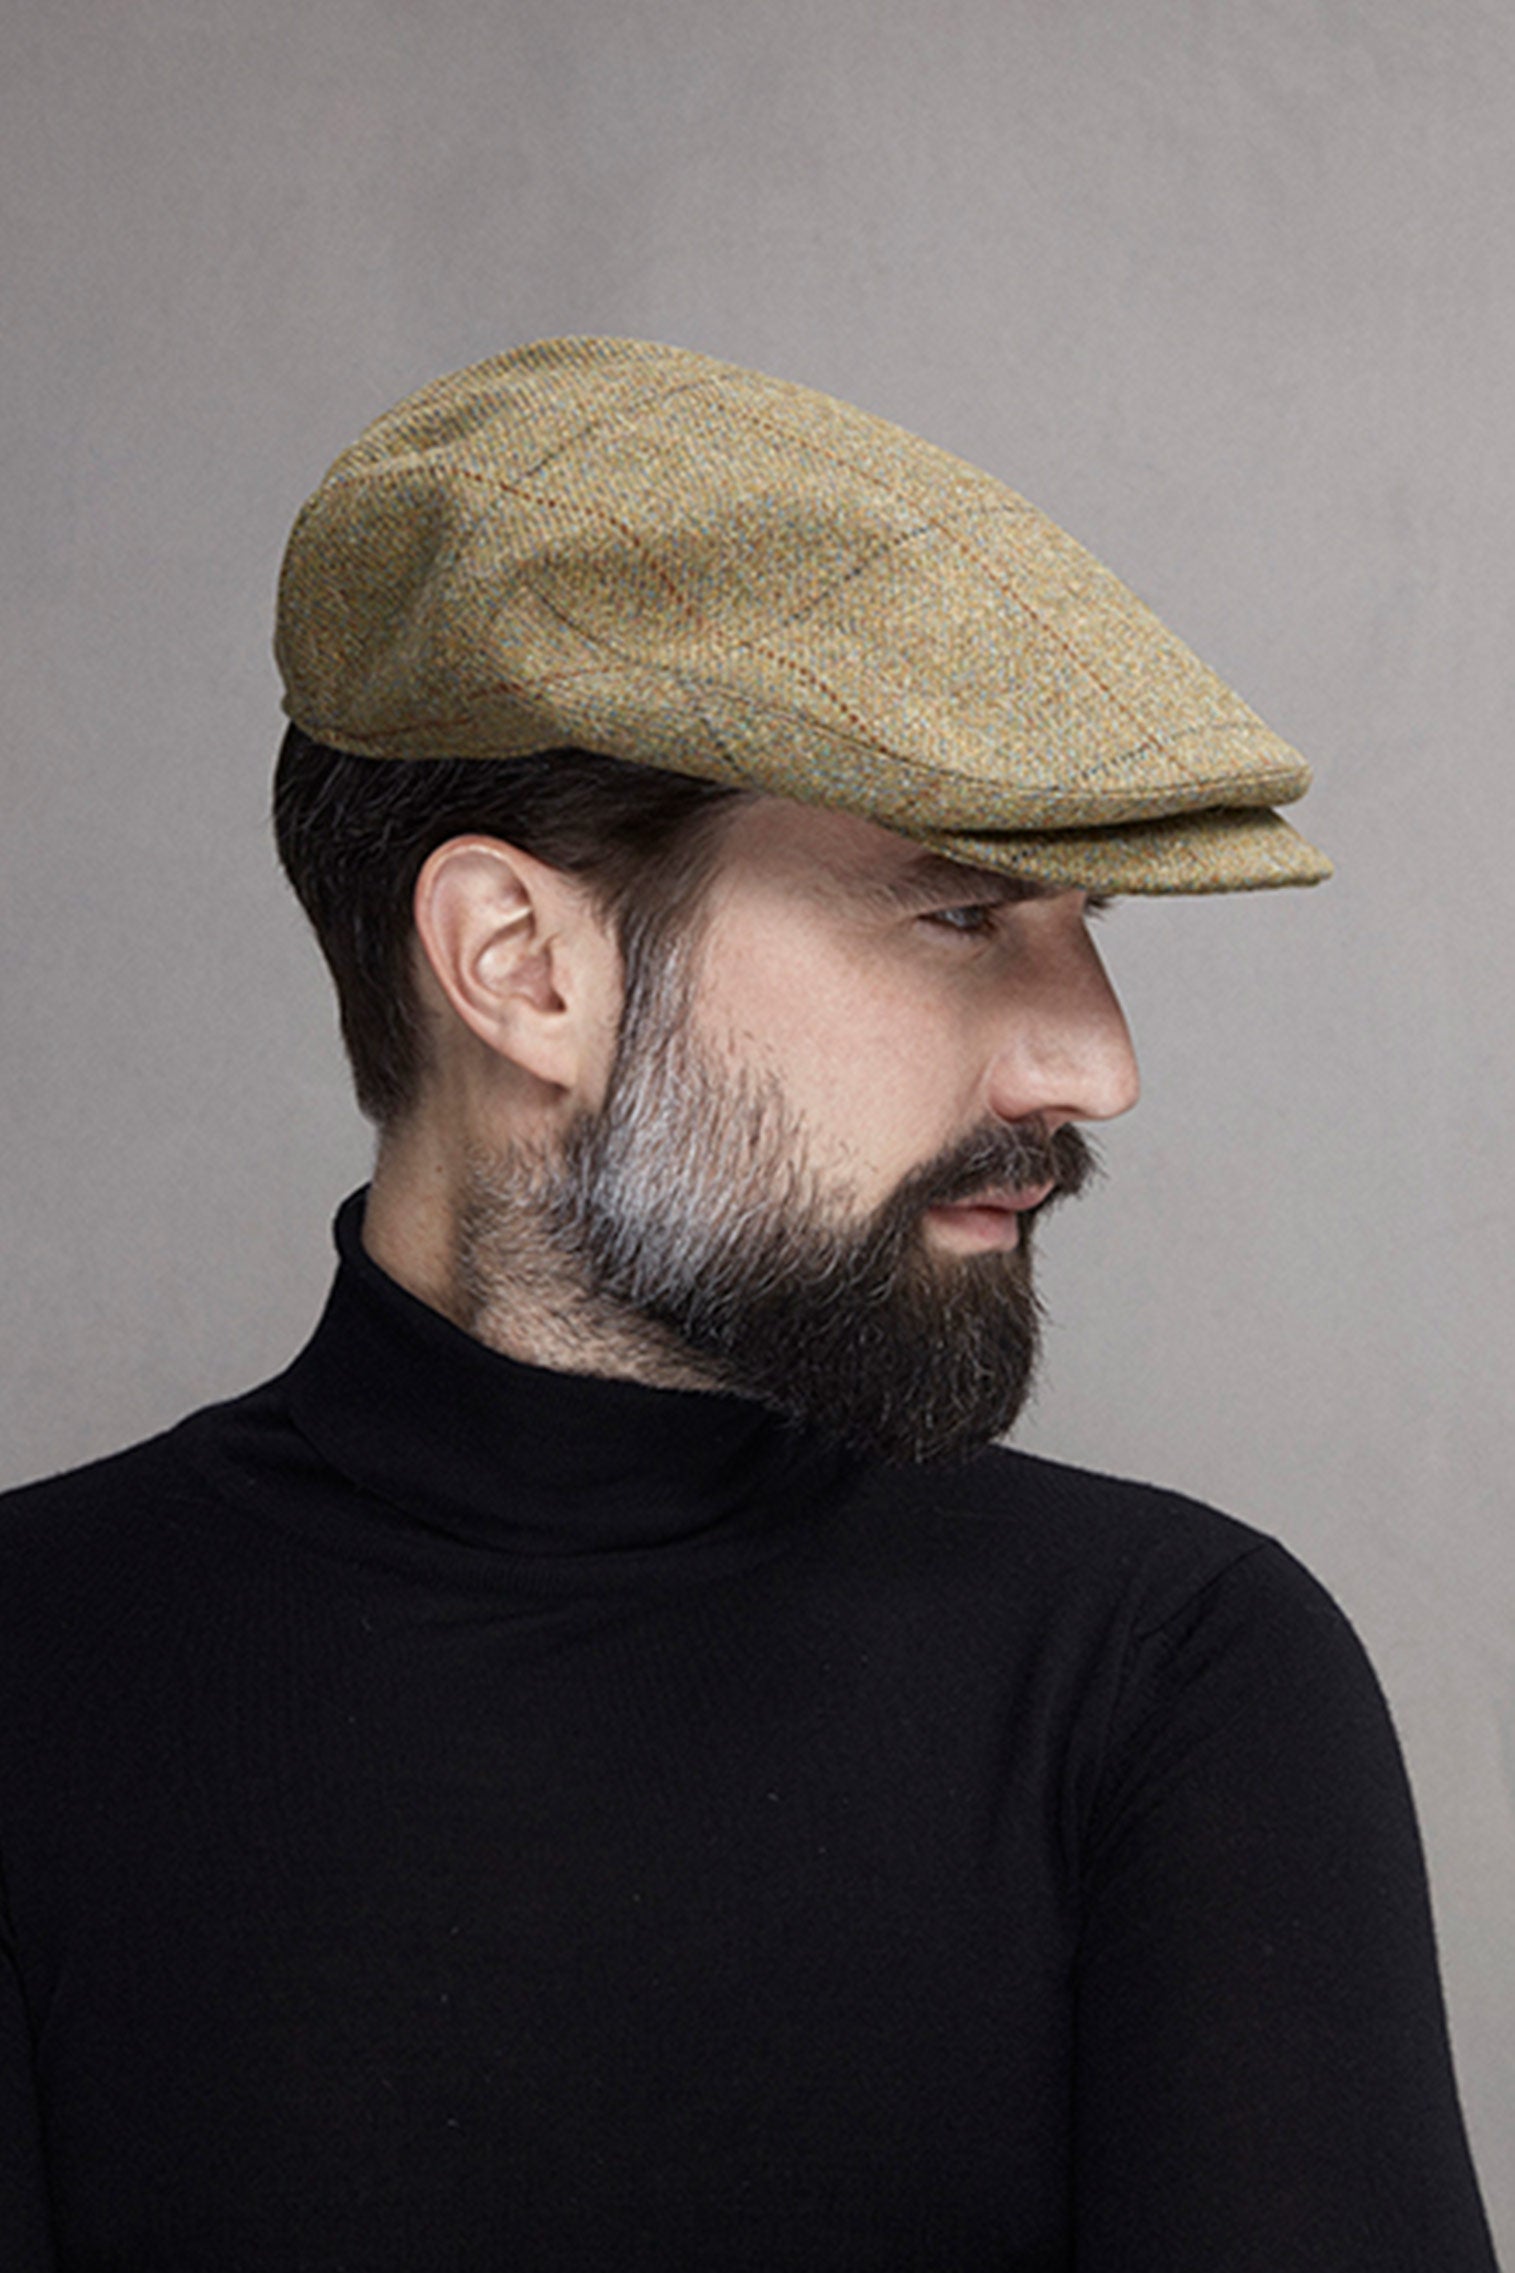 Turnberry Tweed Flat Cap - Hats for Oval Face Shapes - Lock & Co. Hatters London UK